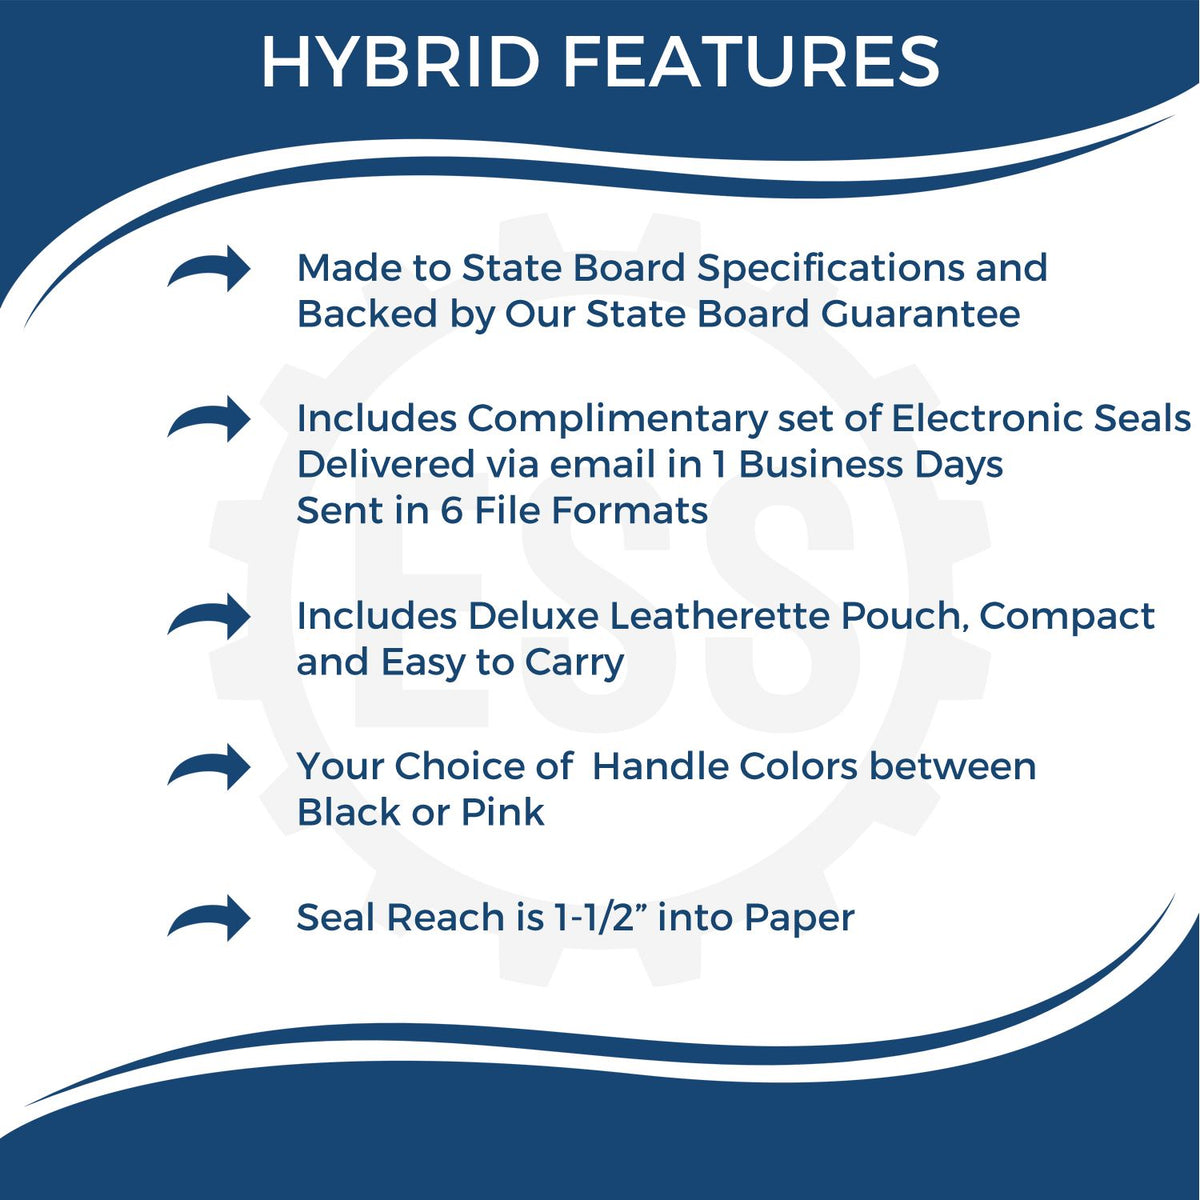 A picture of an infographic highlighting the selling points for the Hybrid Louisiana Land Surveyor Seal